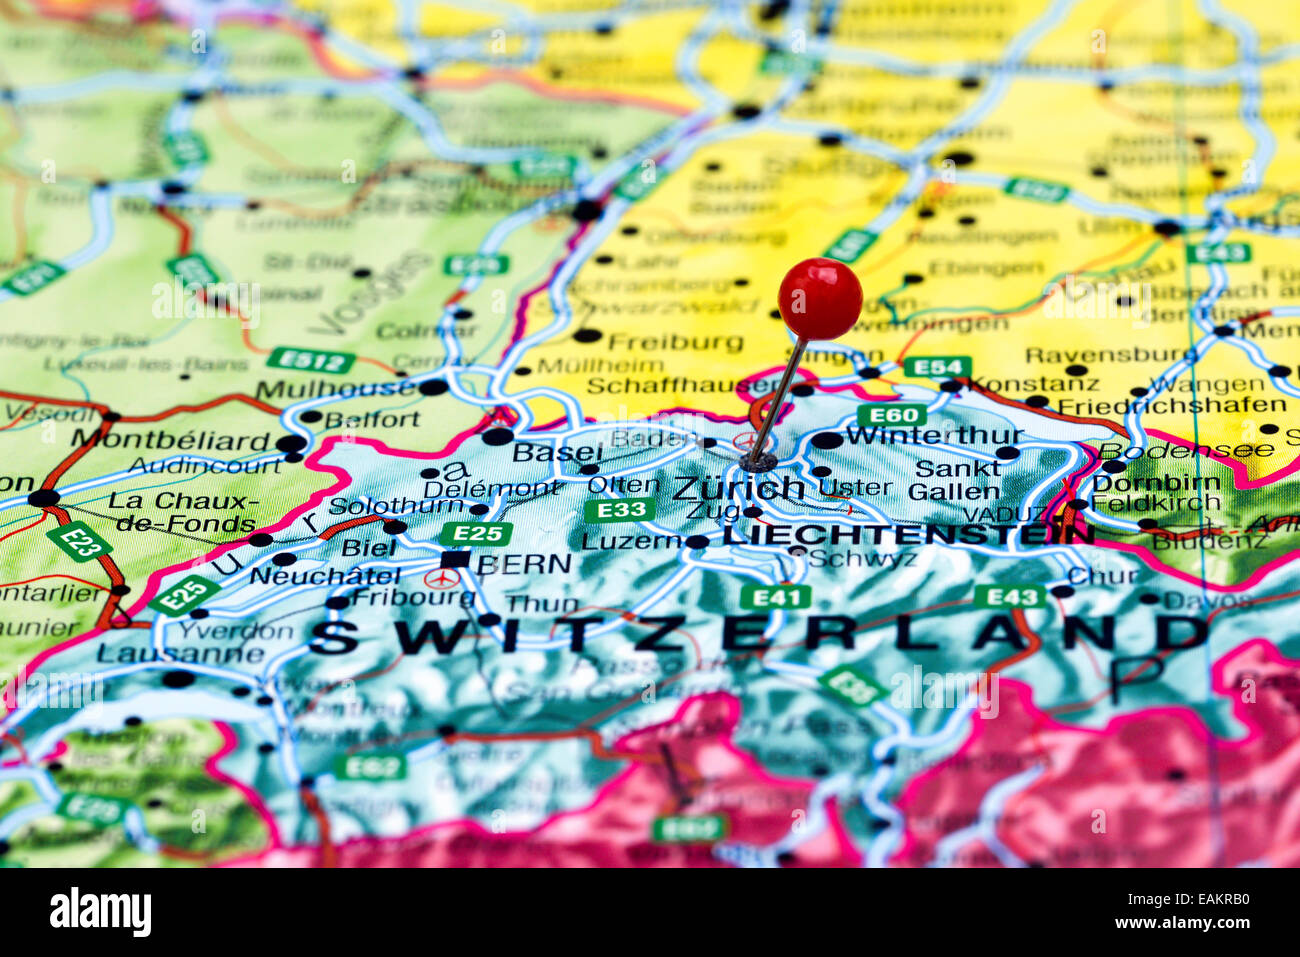 Zurich pinned on a map of europe Stock Photo